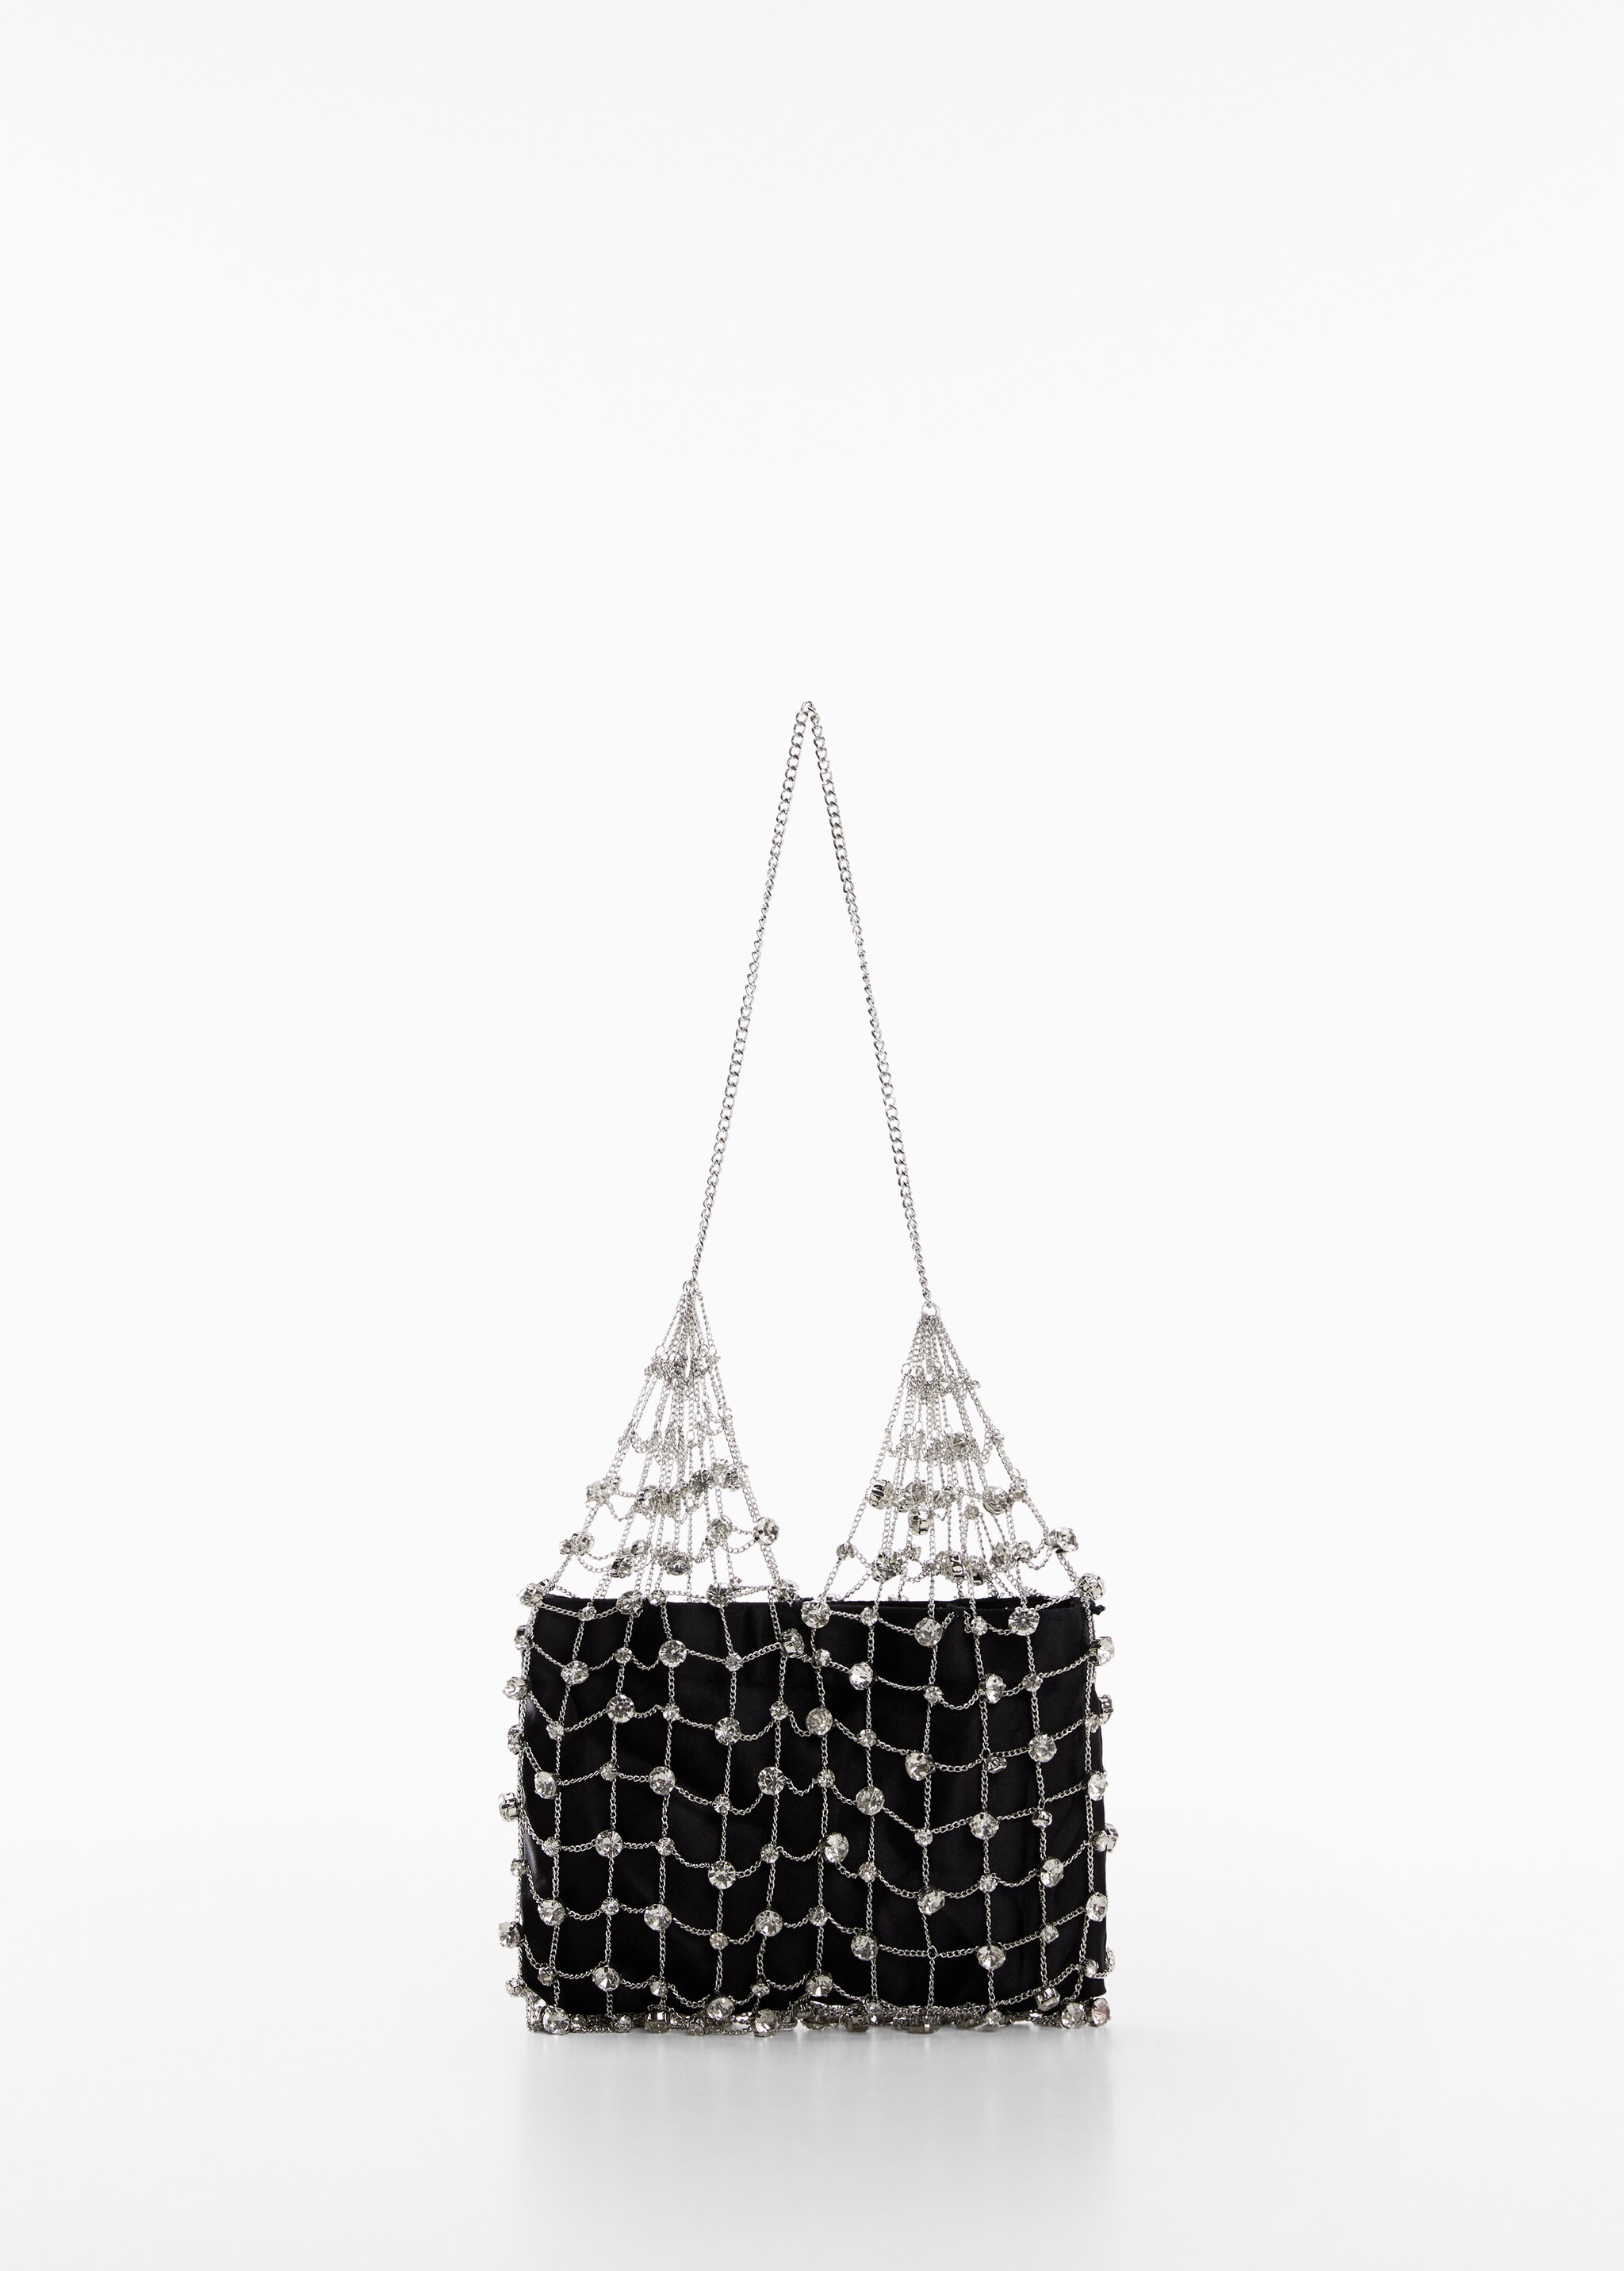 Handbag with rhinestone detail - Article without model